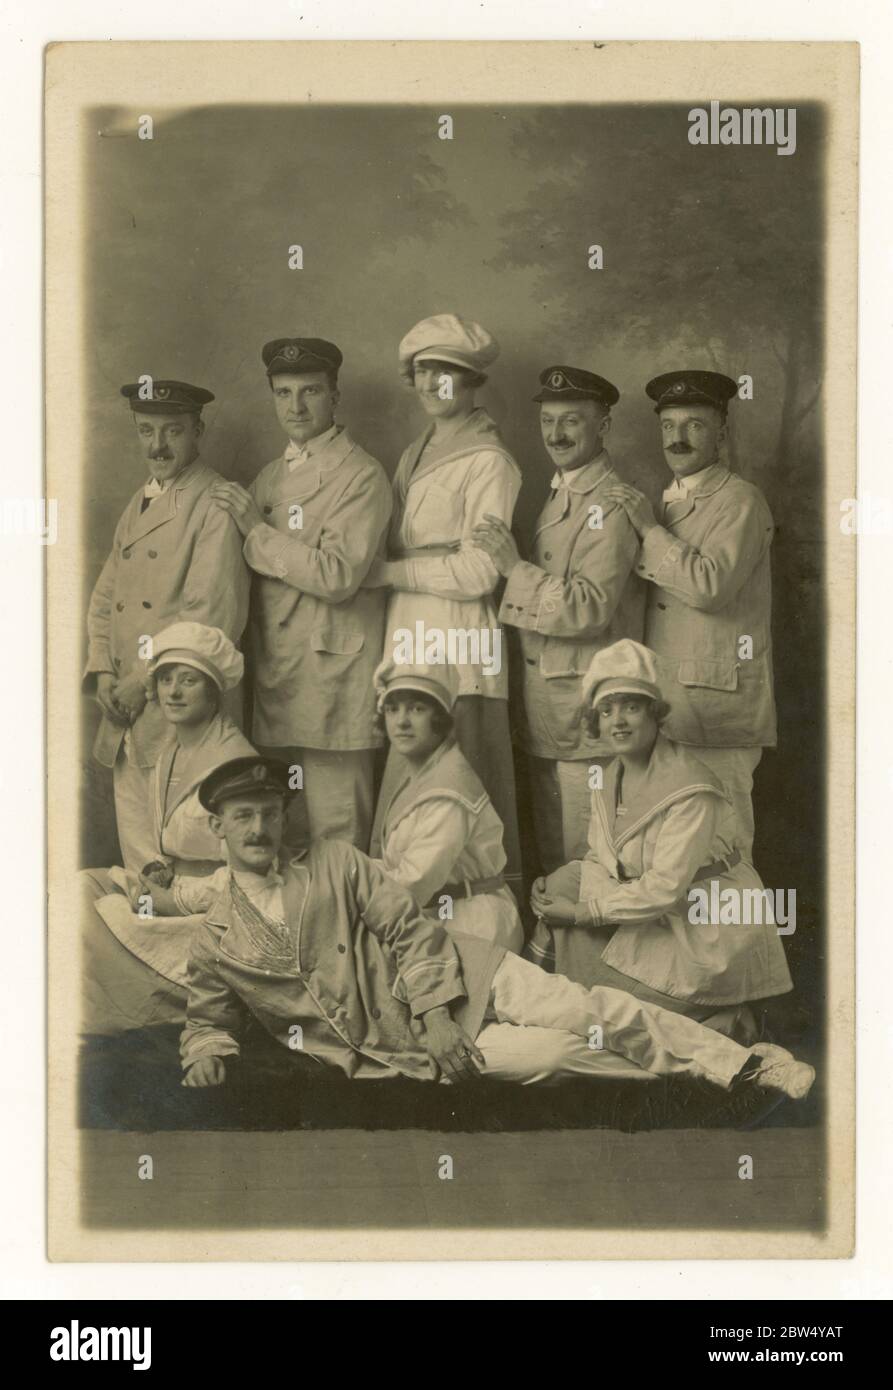 Early 1920's postcard studio portrait of show line-up featuring women dressed as sailors, wearing cook's hats, men in caps, jackets and bow-ties, possibly H.M.S. Pinafore show, Dewsbury, West Yorkshire, England, U.K. Stock Photo